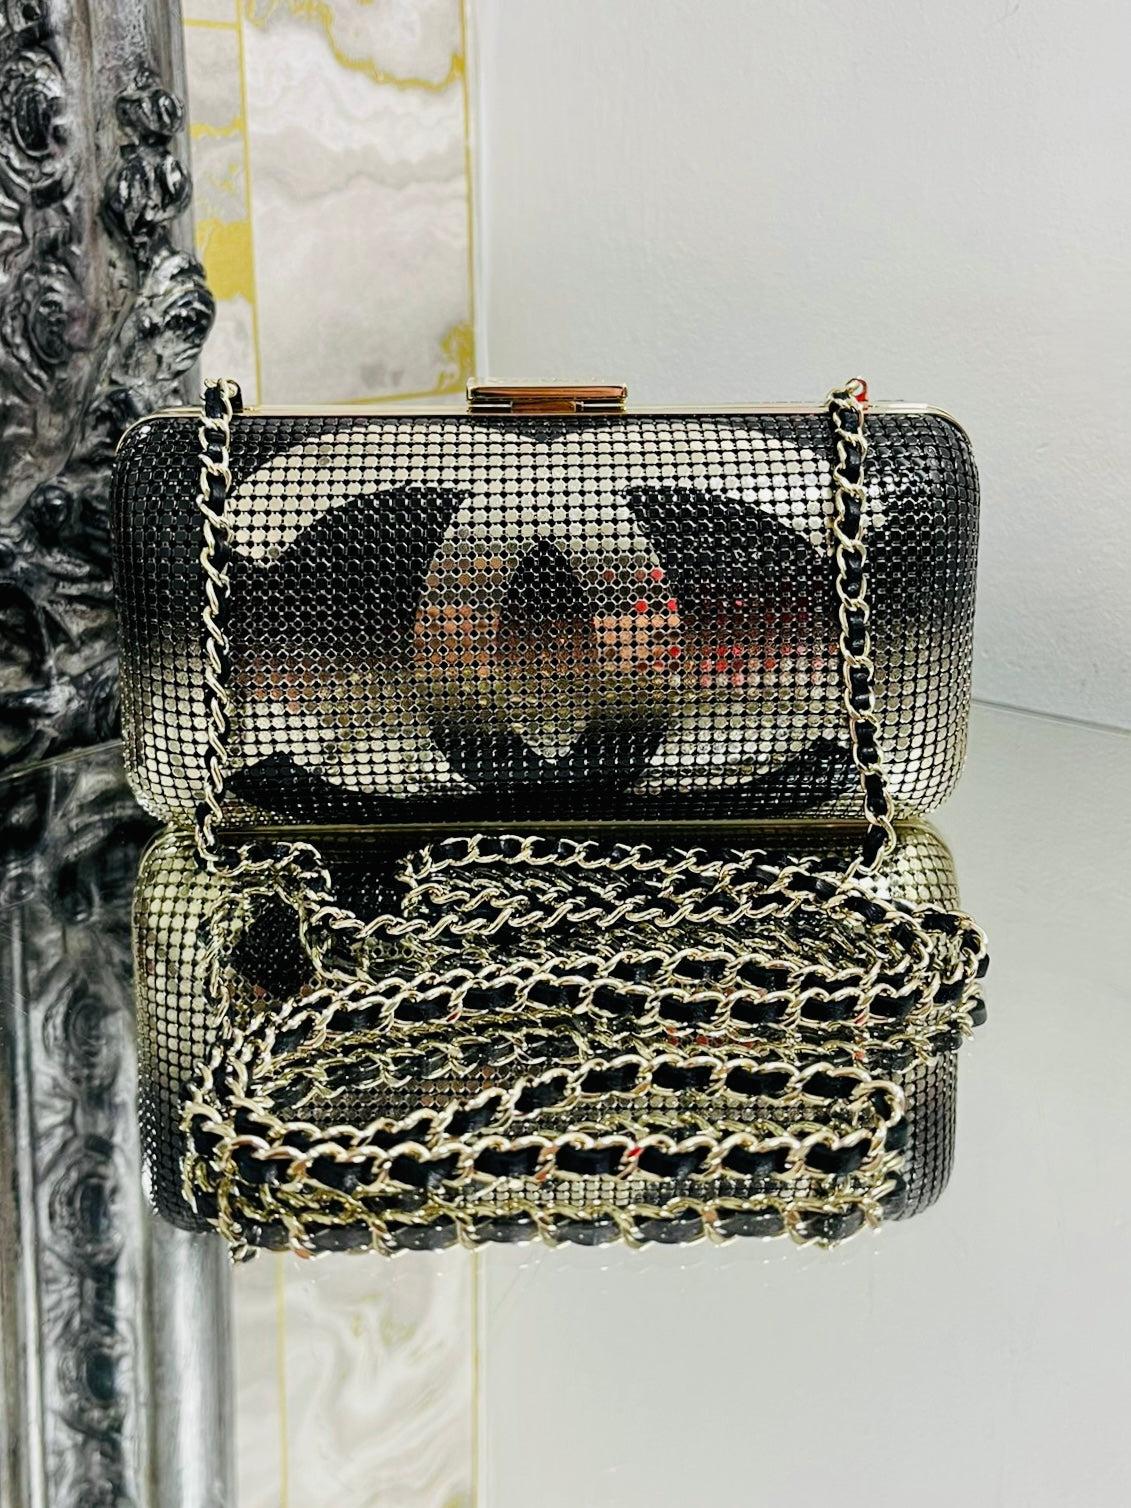 Chanel Hologram 'CC' Logo Minaudiere Bag

Rare bag. Chainmail barrel style bag with large 'CC' logo 

to the front. Removable iconic black leather and gold chain 

strap. Chanel engraved closure to the top.

From 2014 Collection 

Size - Height 8cm,